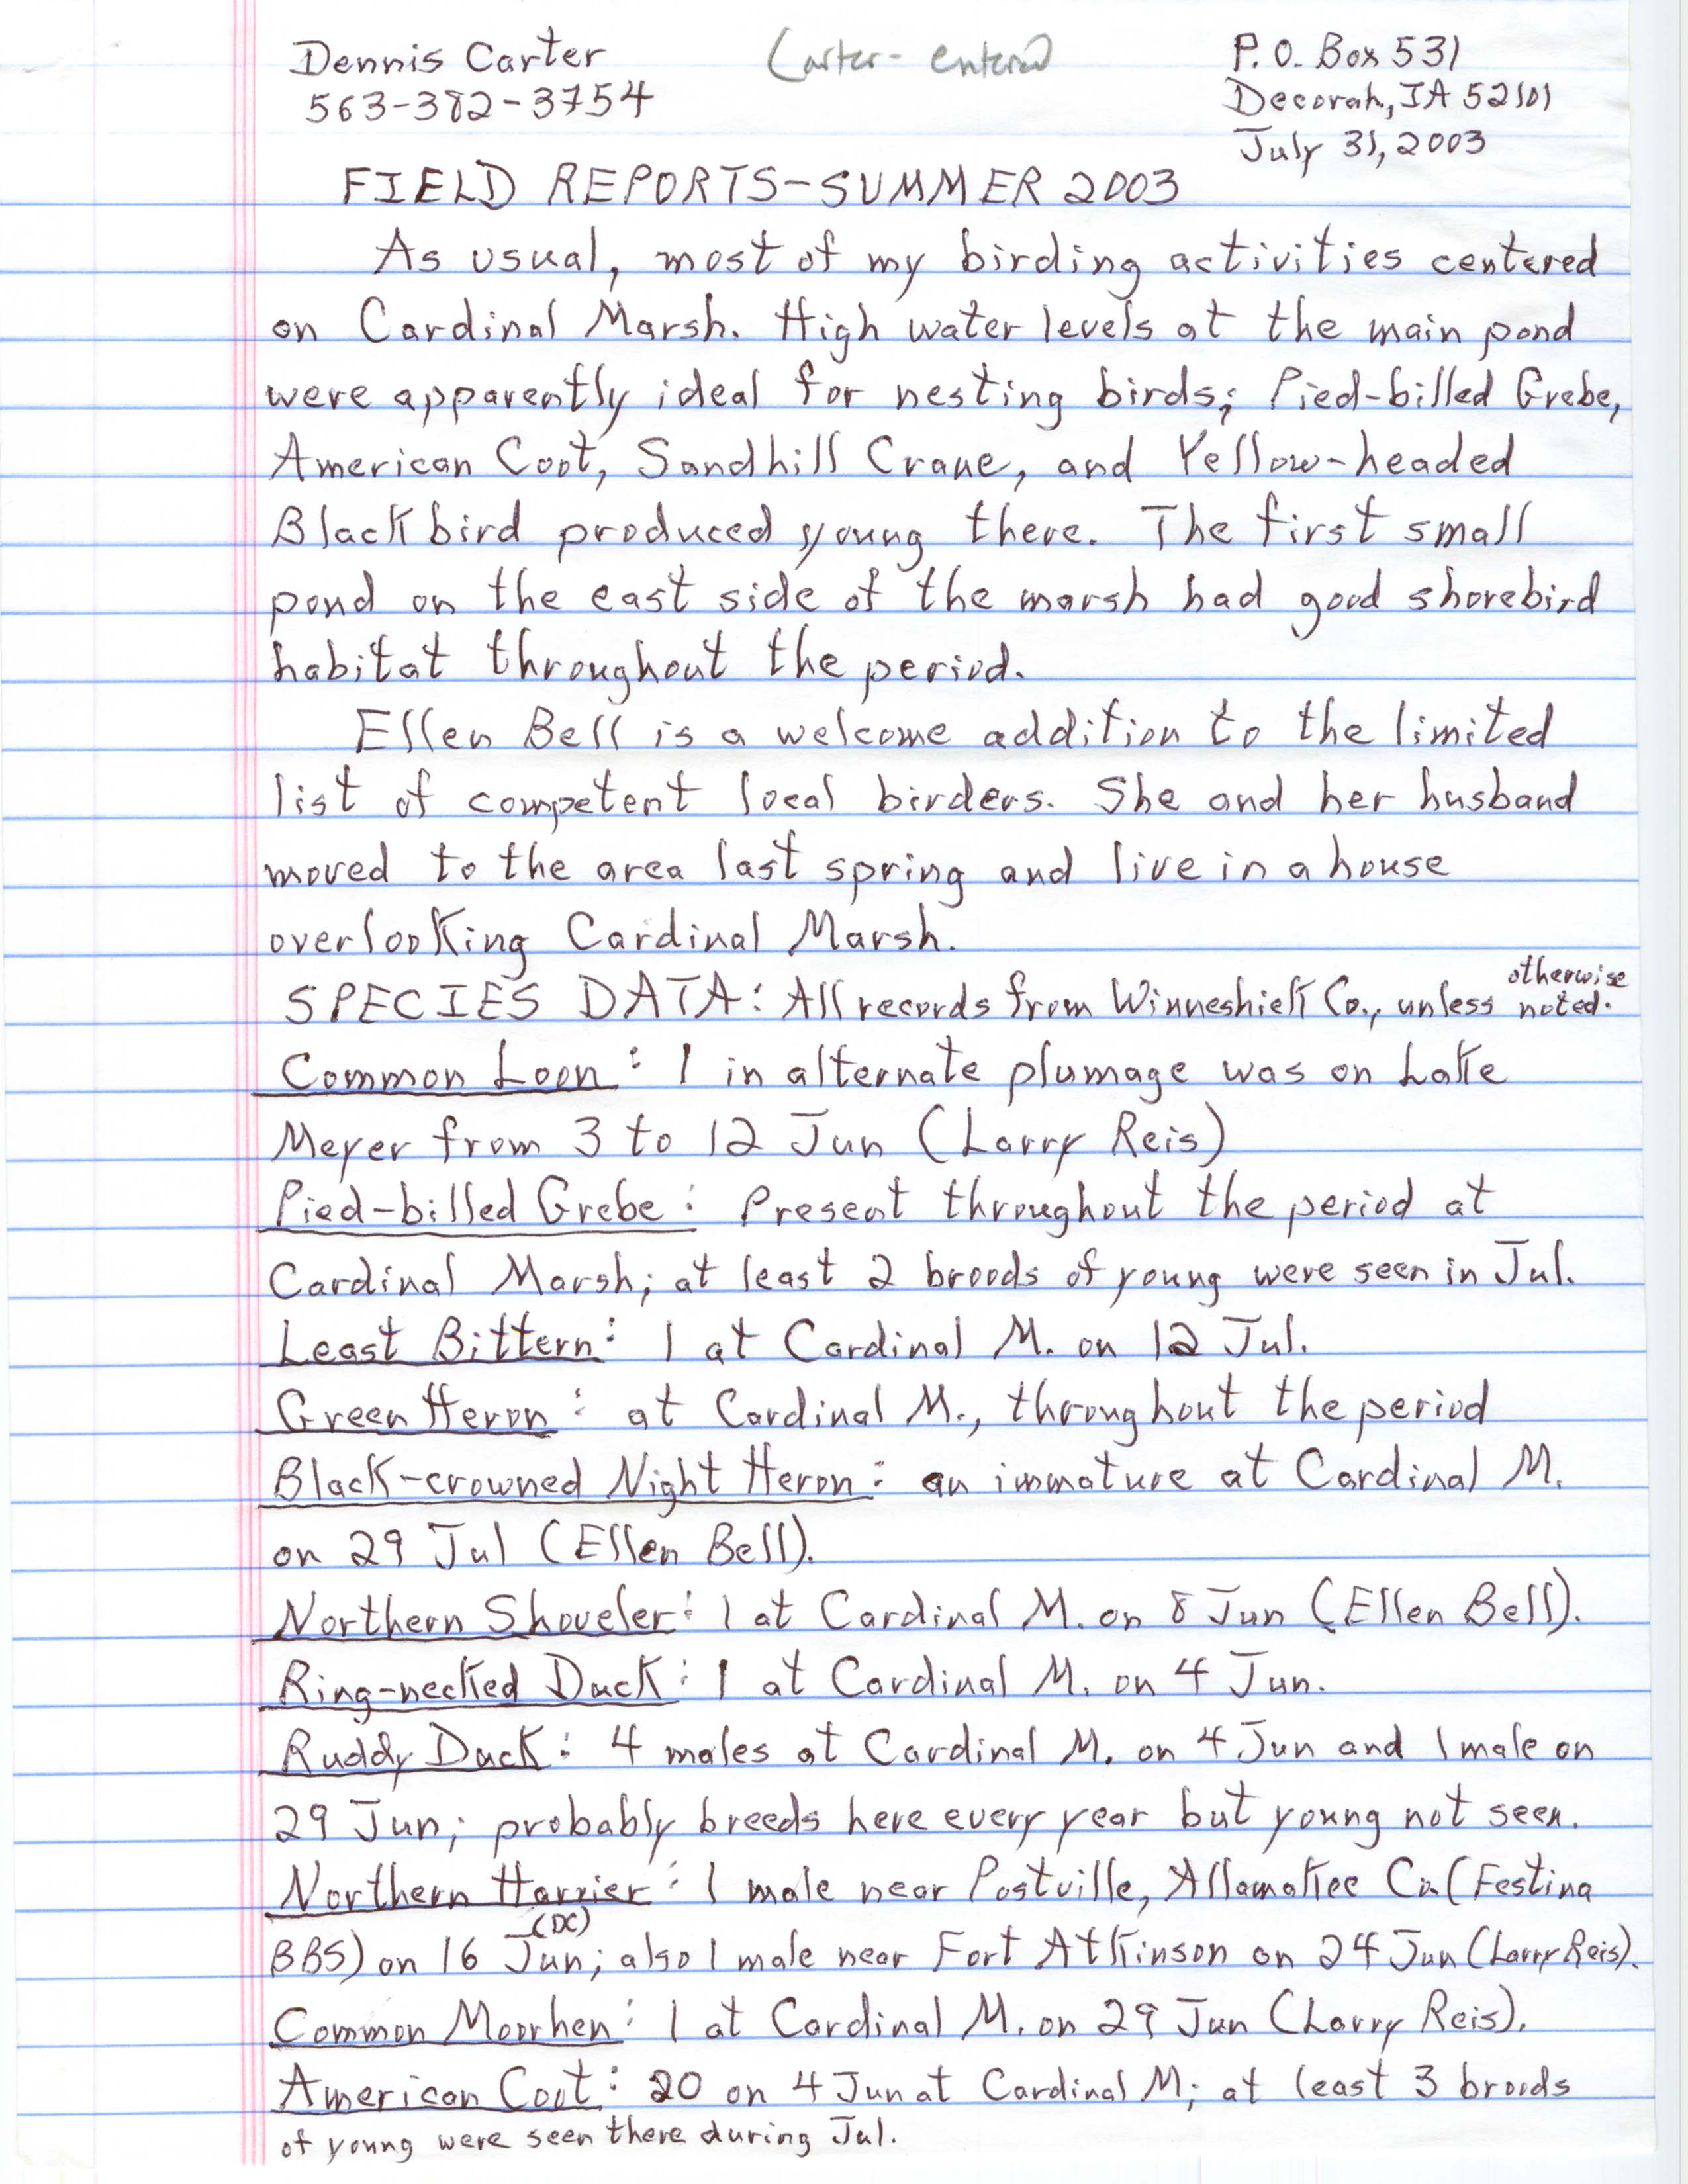 Field notes contributed by Dennis L. Carter, July 31, 2003